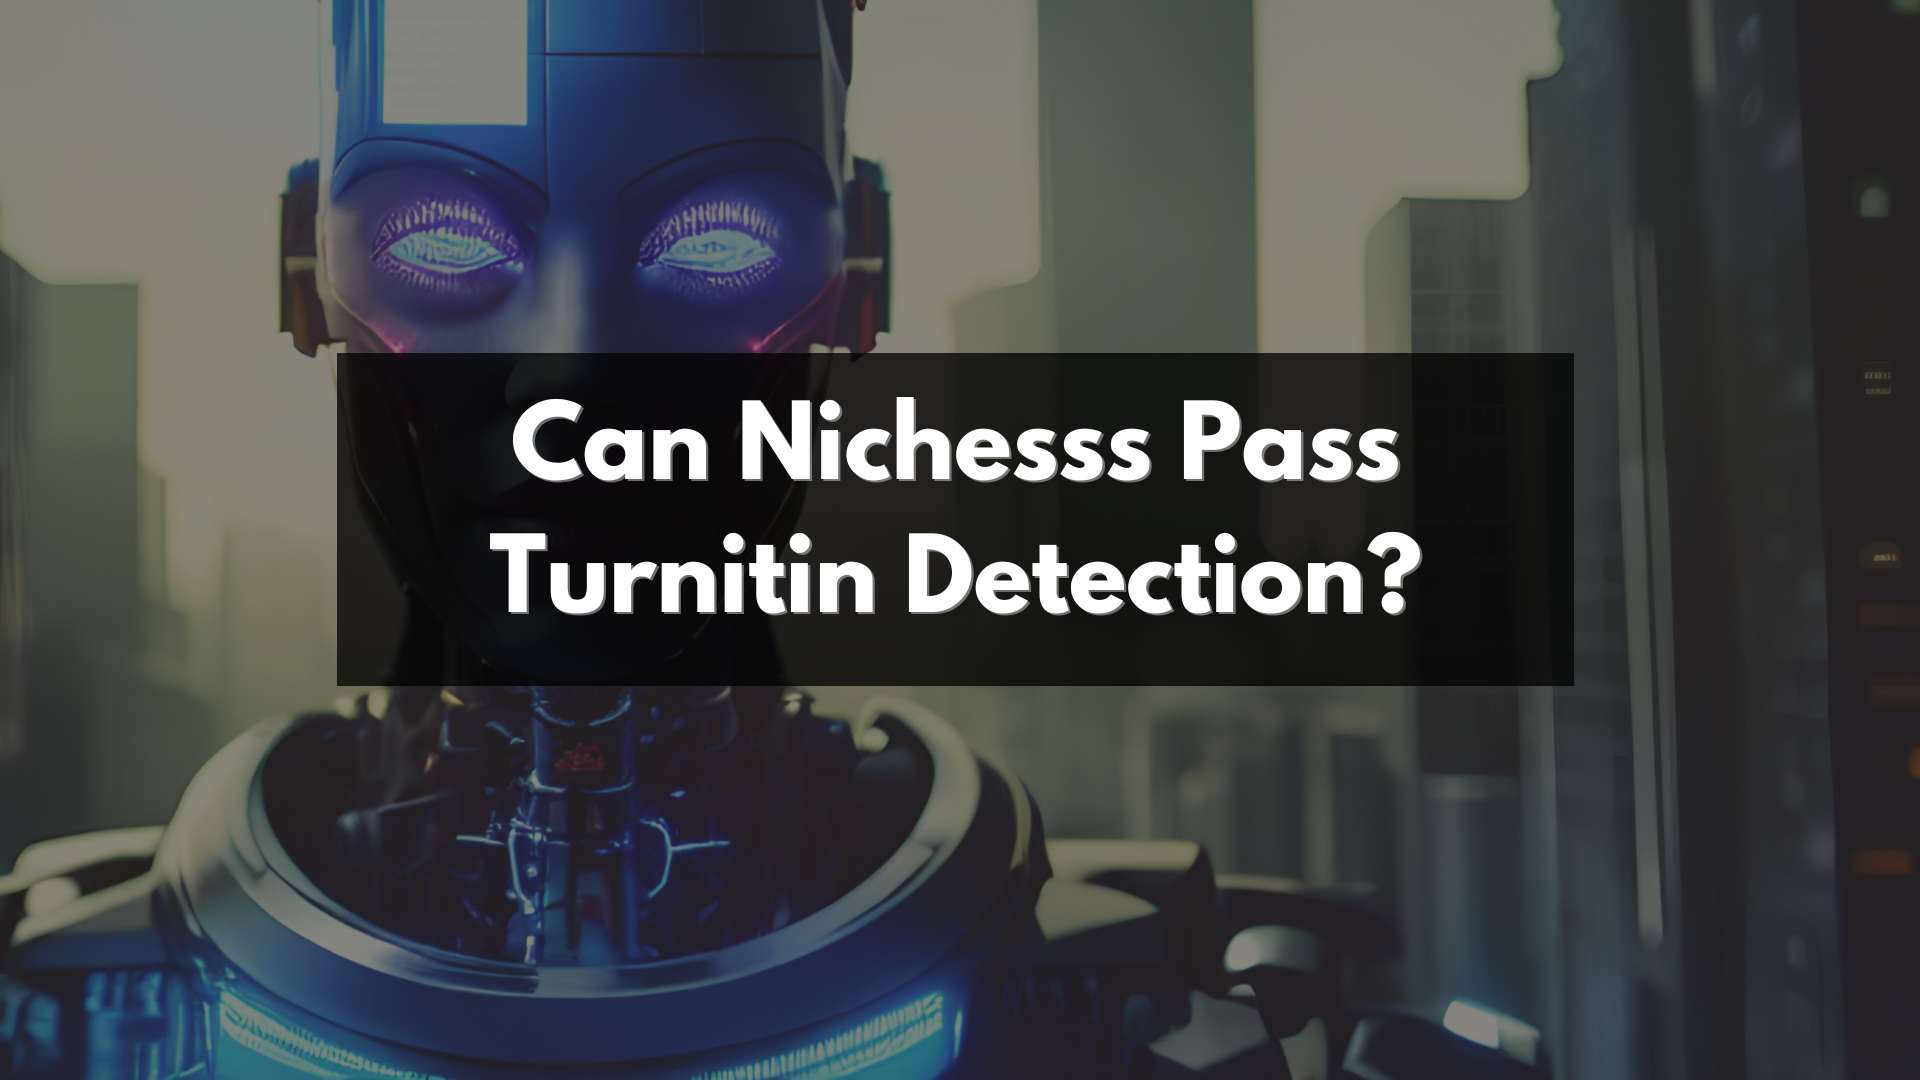 Can nichesss pass turnitin detection